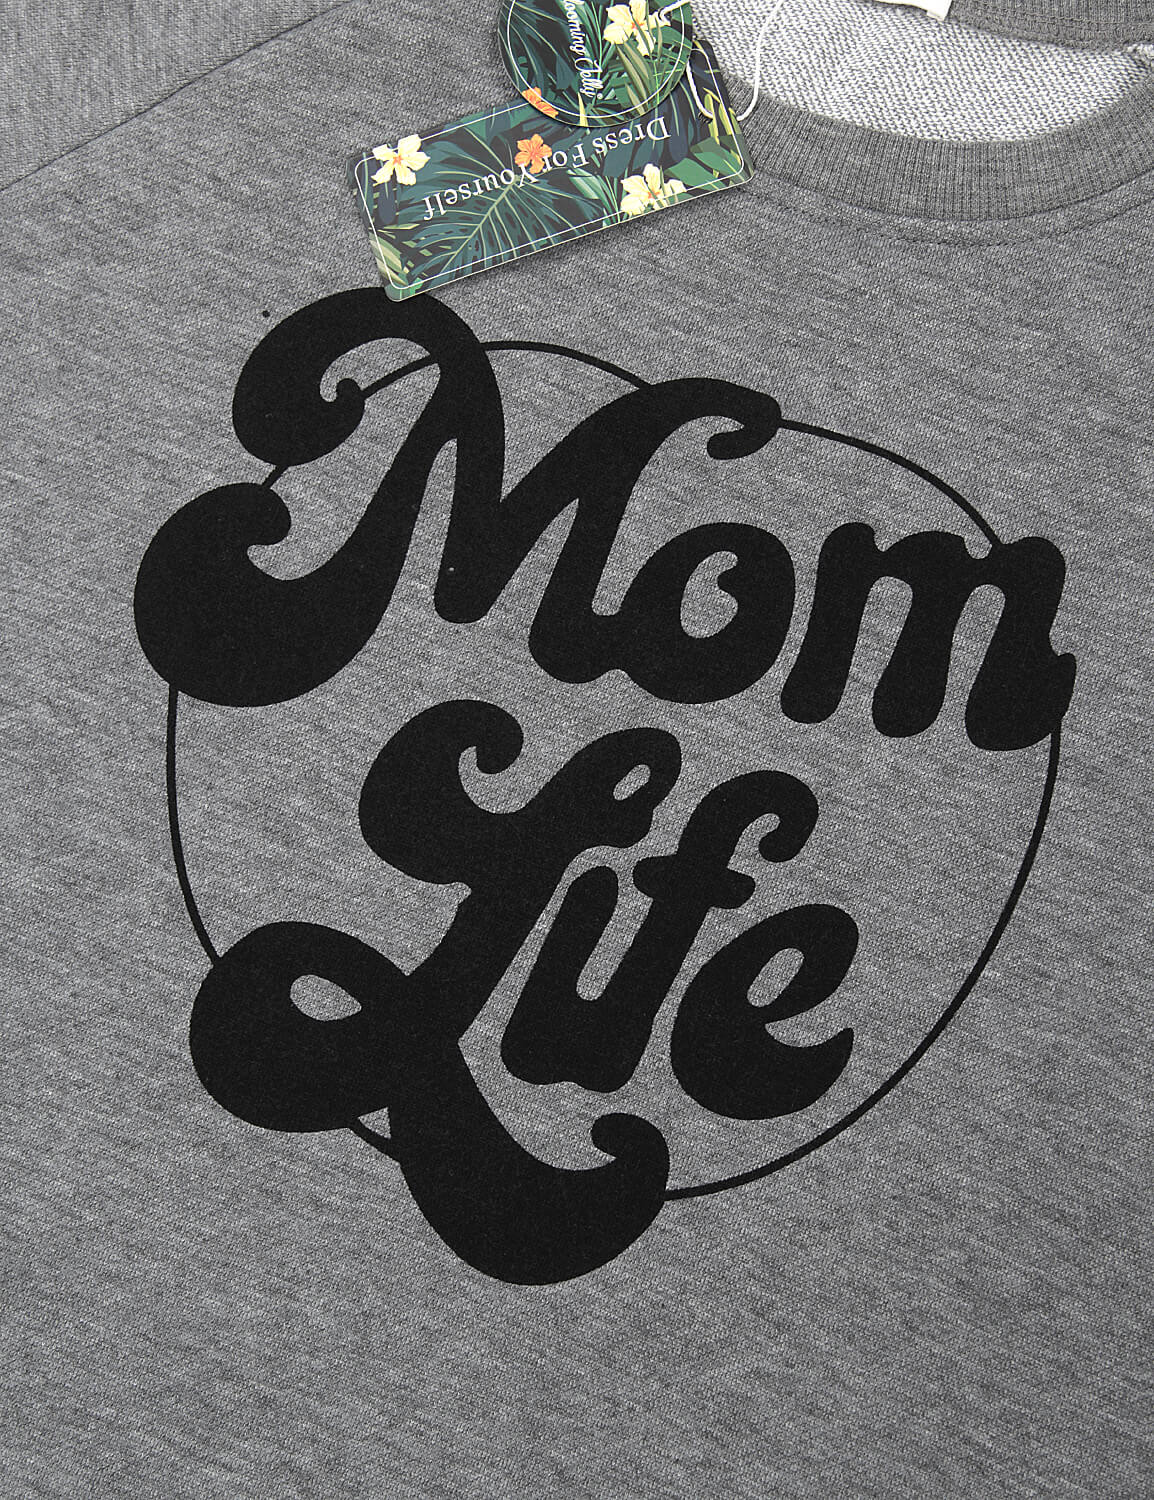 Blooming Jelly_Chic Mom Life Sweatshirt_Letter Print_303083_07_Mom Style Casual Outfits_Tops_Sweatshirt